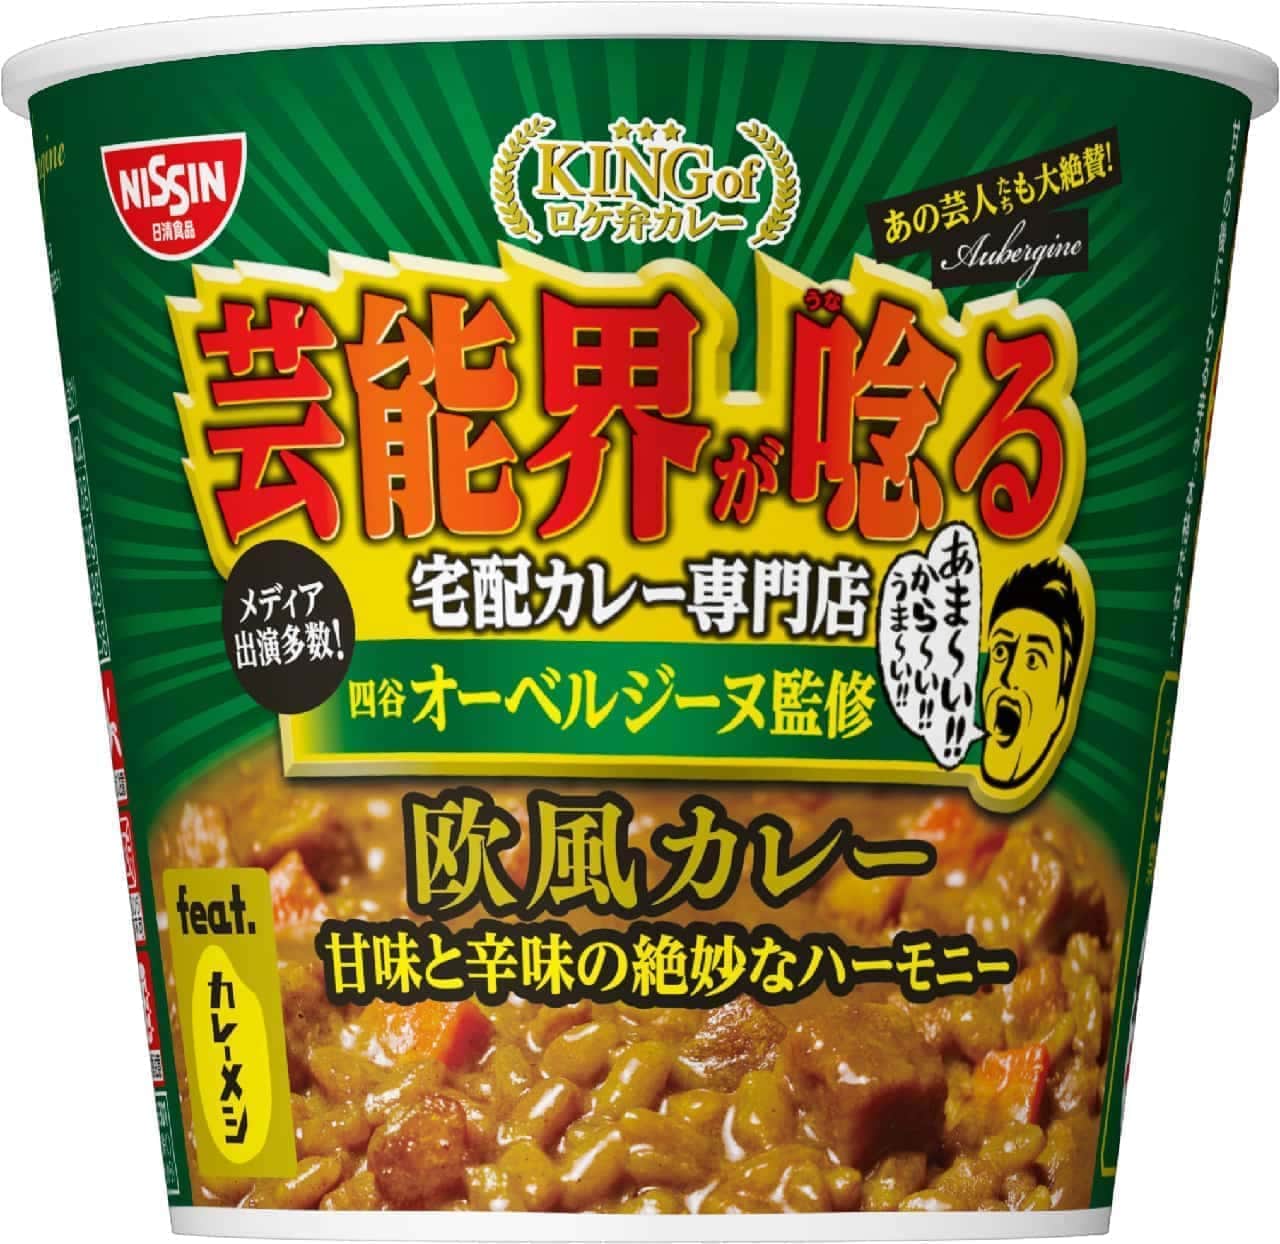 Nissin Foods "European Curry Supervised by Aubergine"